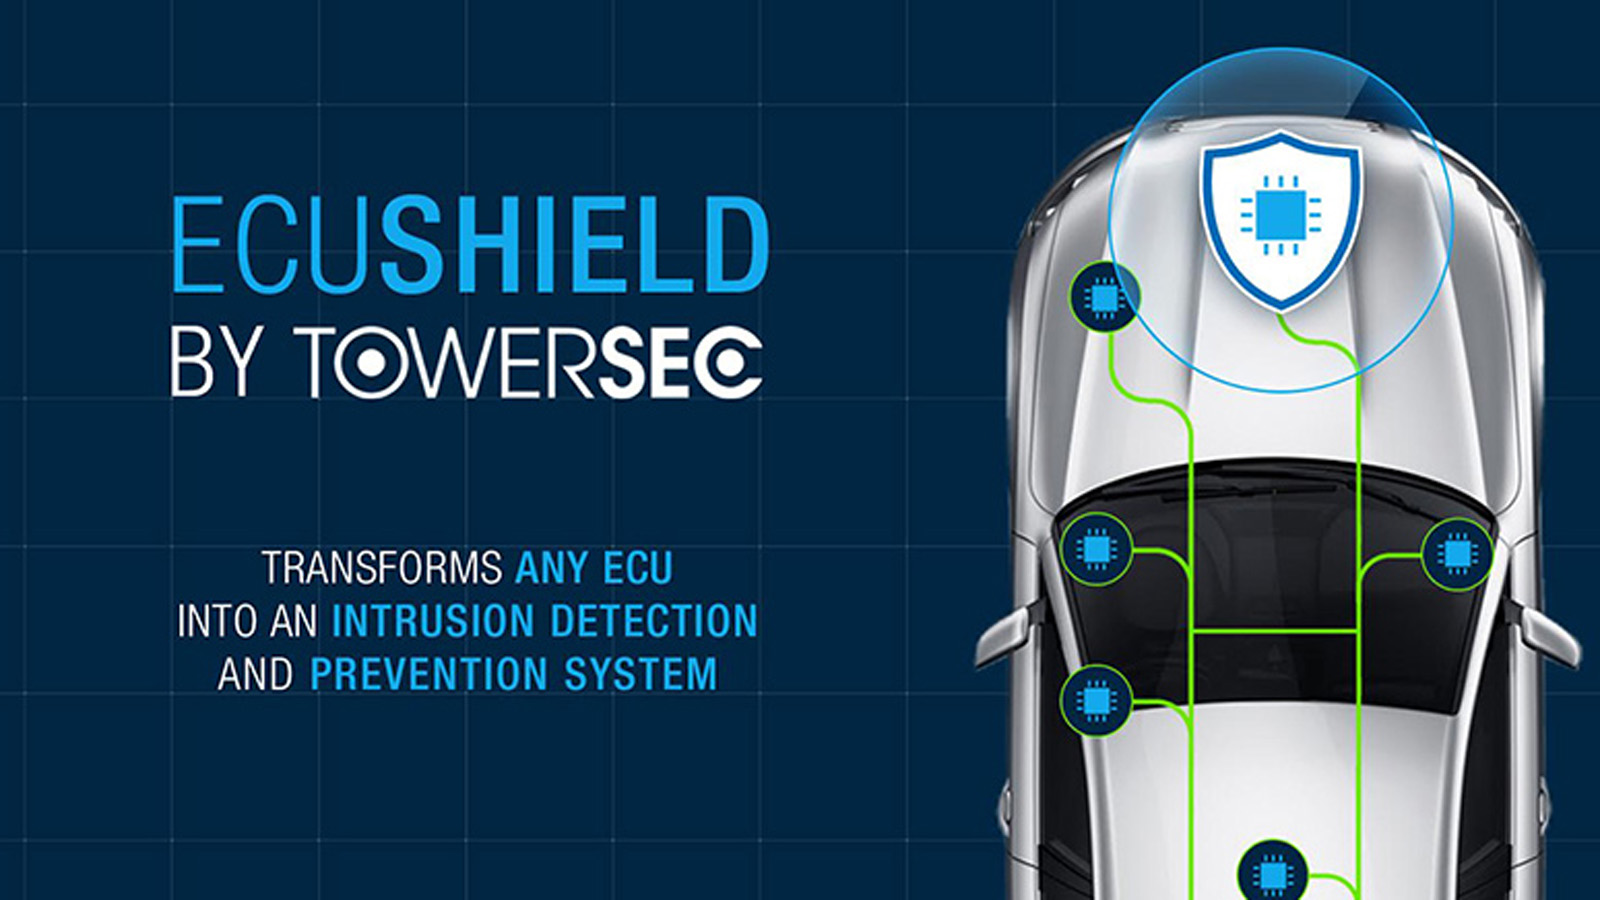 ECUSHIELD is a real-time ready product which embeds to allow any ECU or gateway to detect and prevent hacking. Photo courtesy